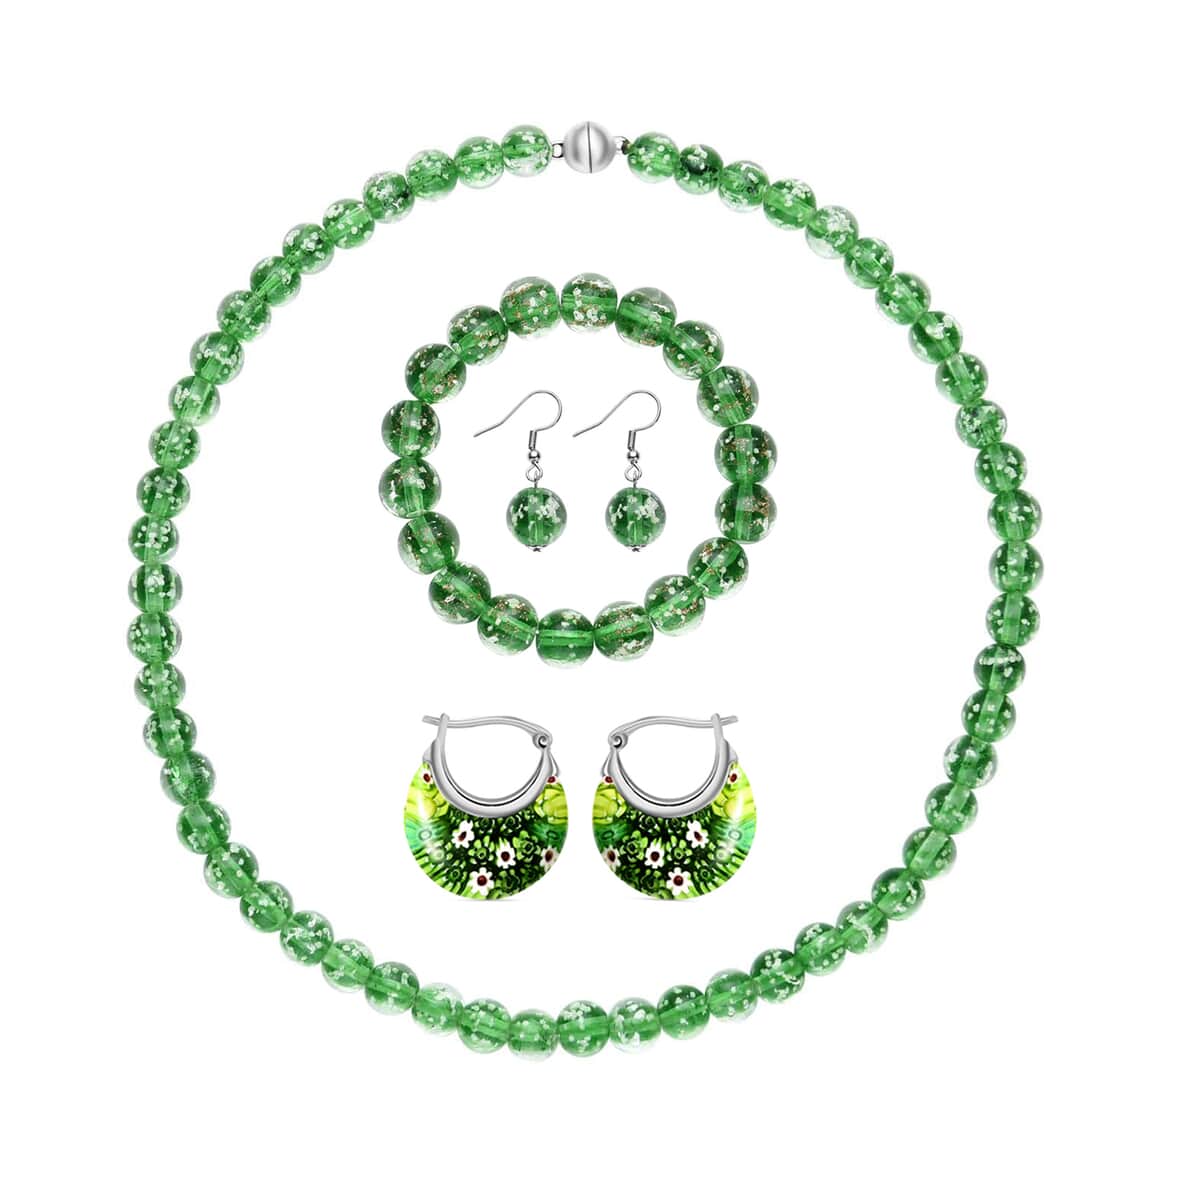 Green Color Glow Murano Style Beaded Stretch Bracelet and Dangle Earrings, Hoop Earrings and Necklace (20 Inches) in Silvertone and Stainless Steel image number 0